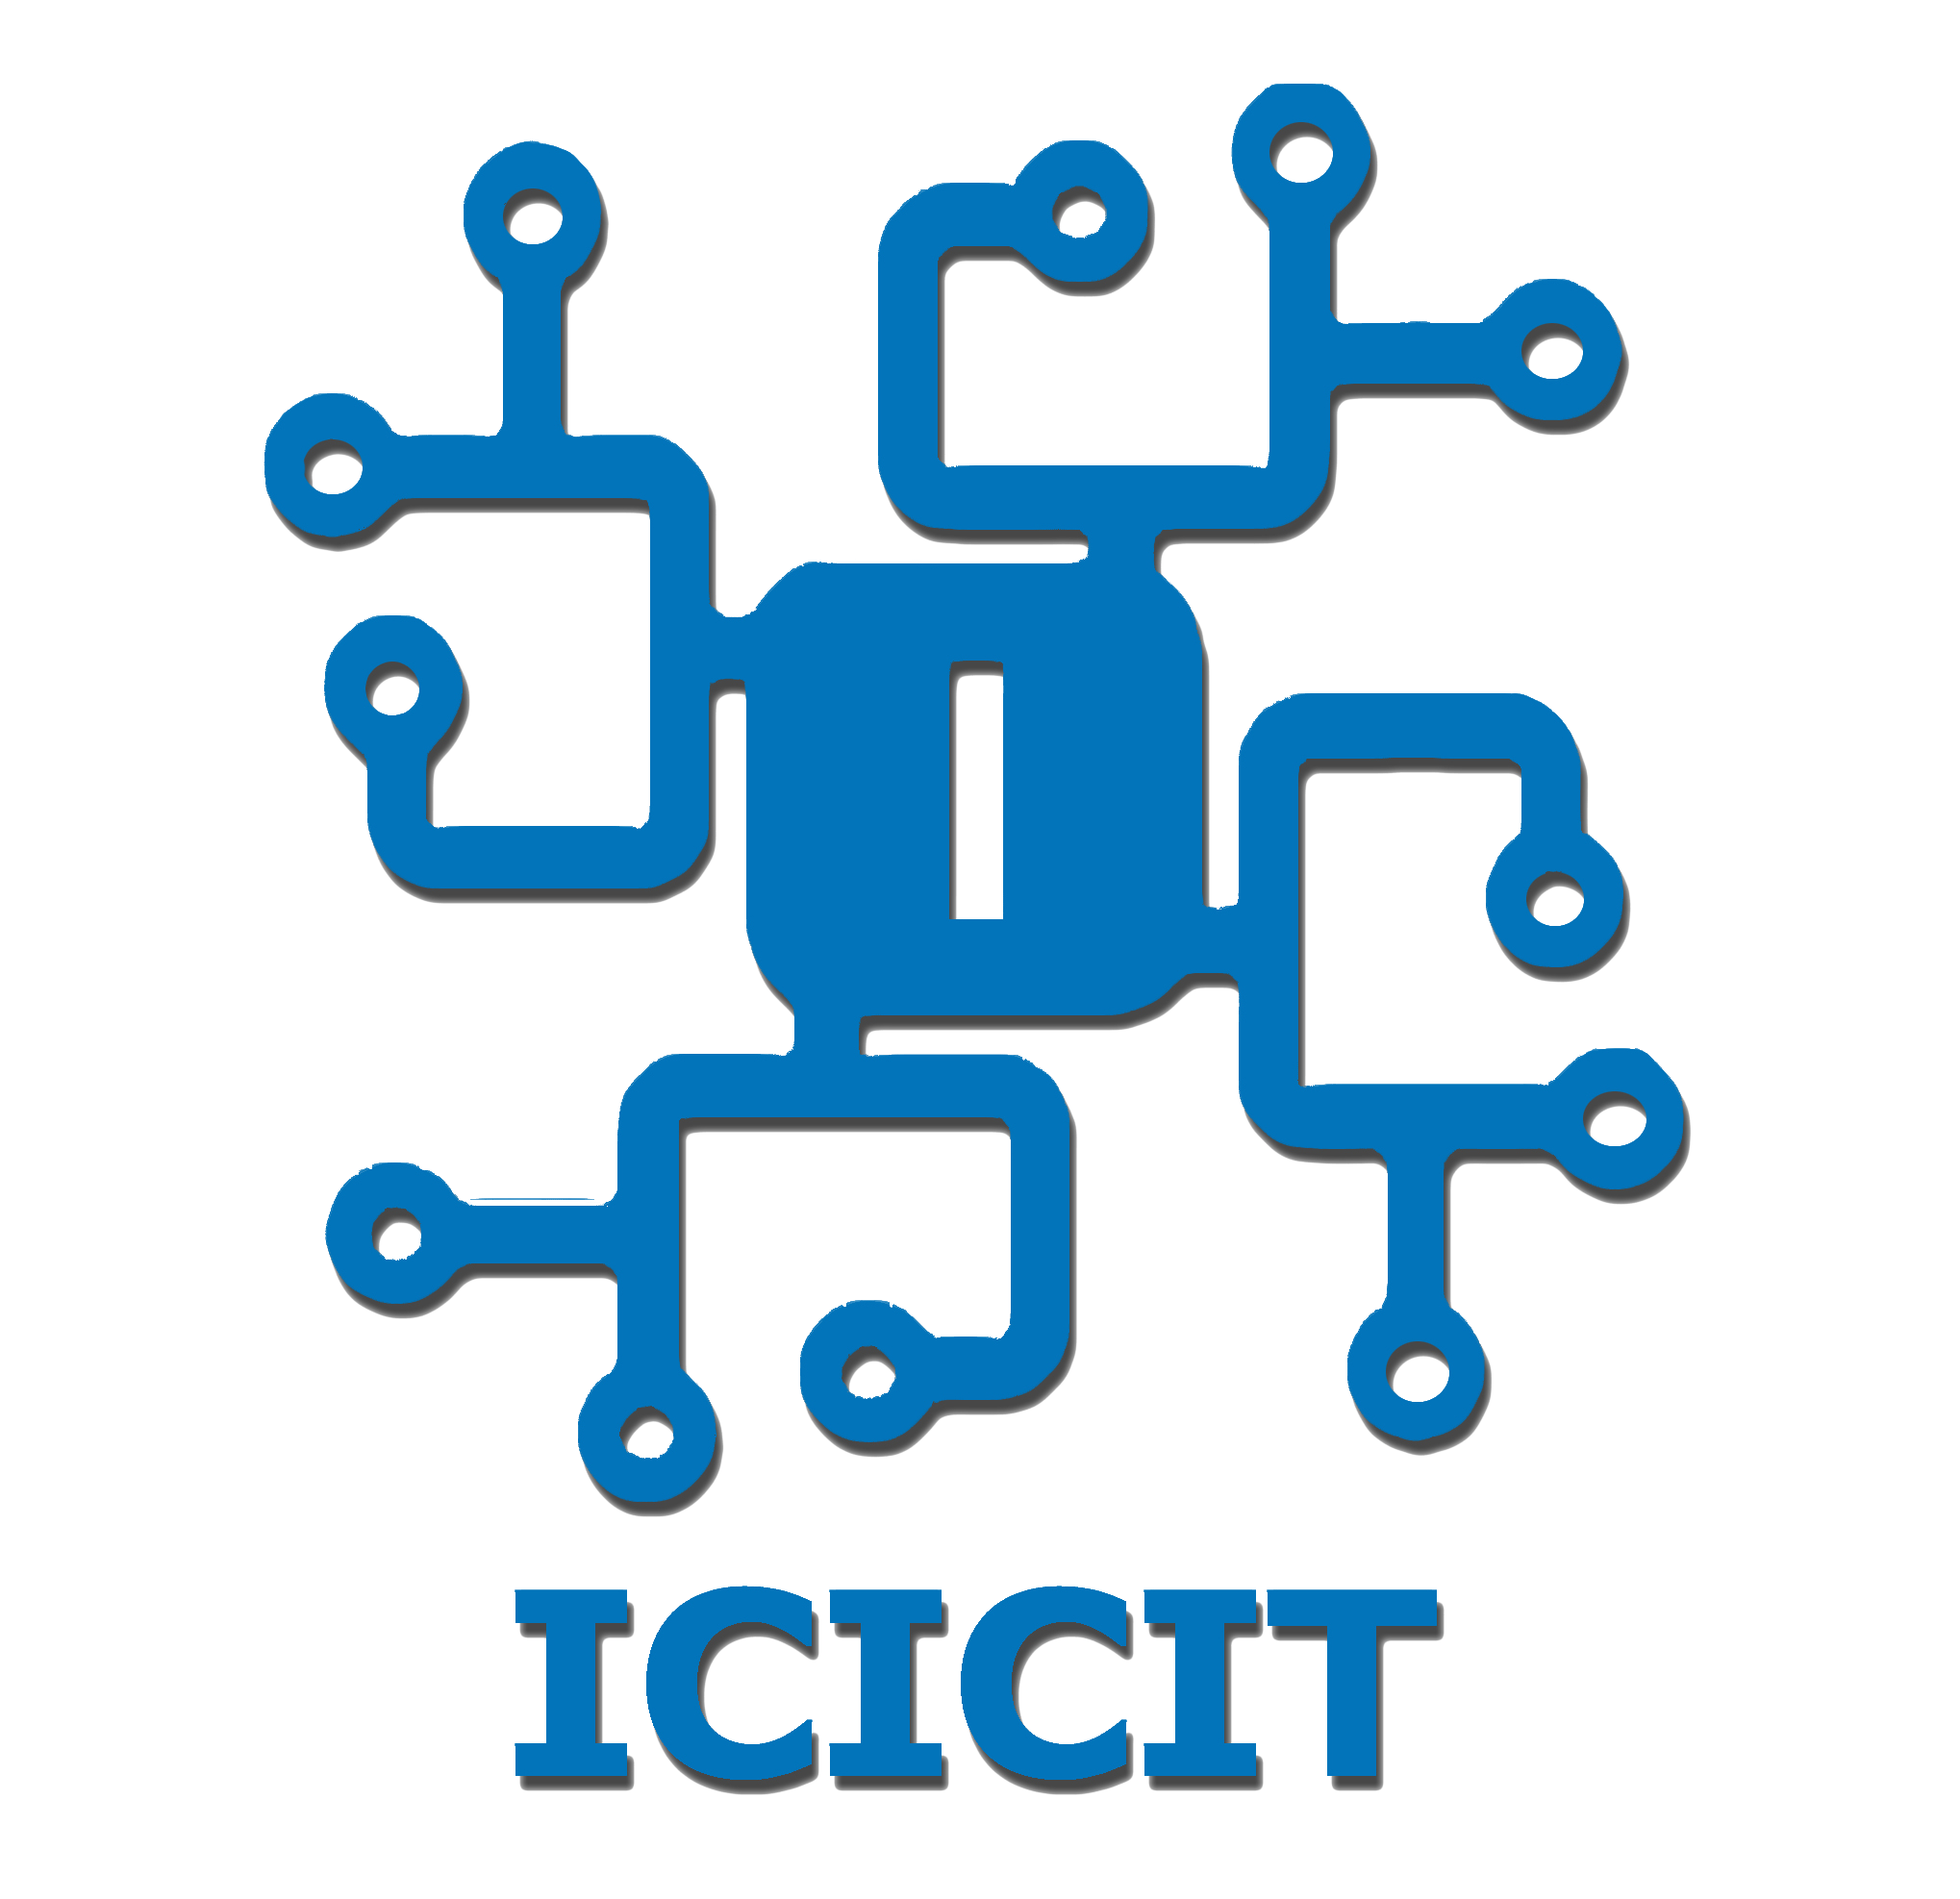 6th International Conference on Inventive Computation and Information Technologies ICICIT